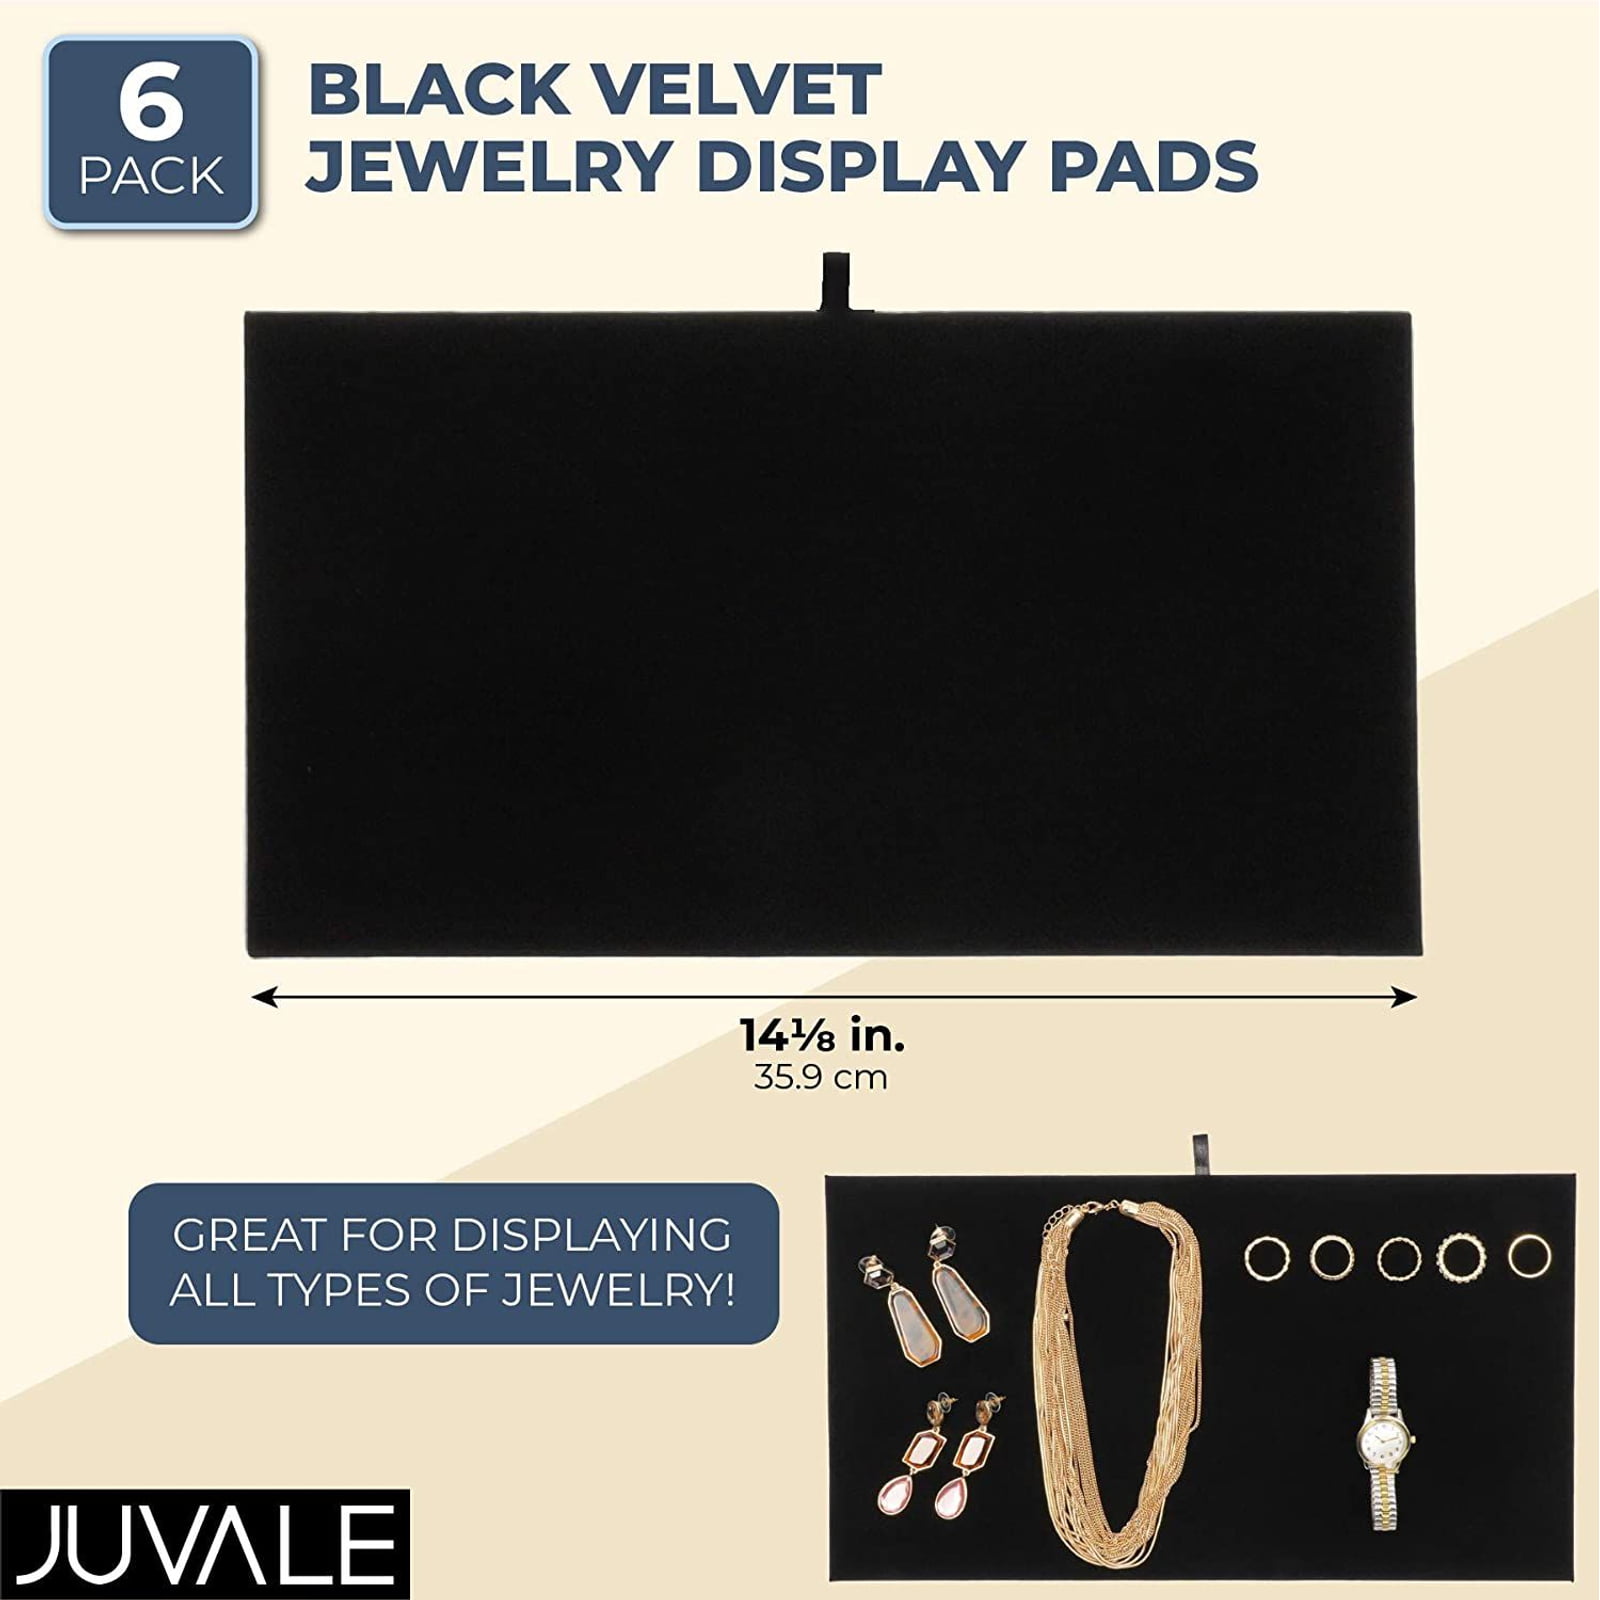 Details about   5 Pc 7'' x 11'' Small Oval Jewelry Black Velvet Padded Pad Display Insert Tray 